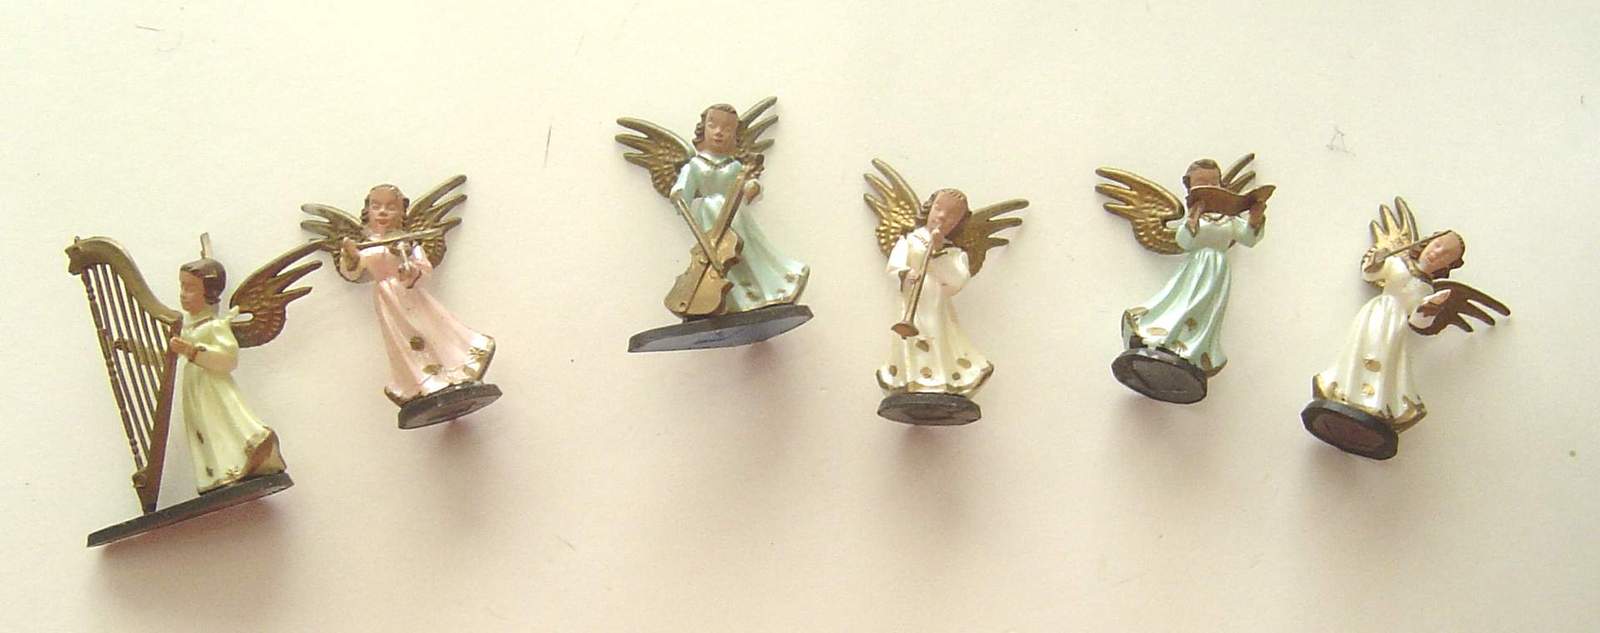 Primary image for Miniature Angels Playing Music Celluloid Figurines  1960's Set of 6